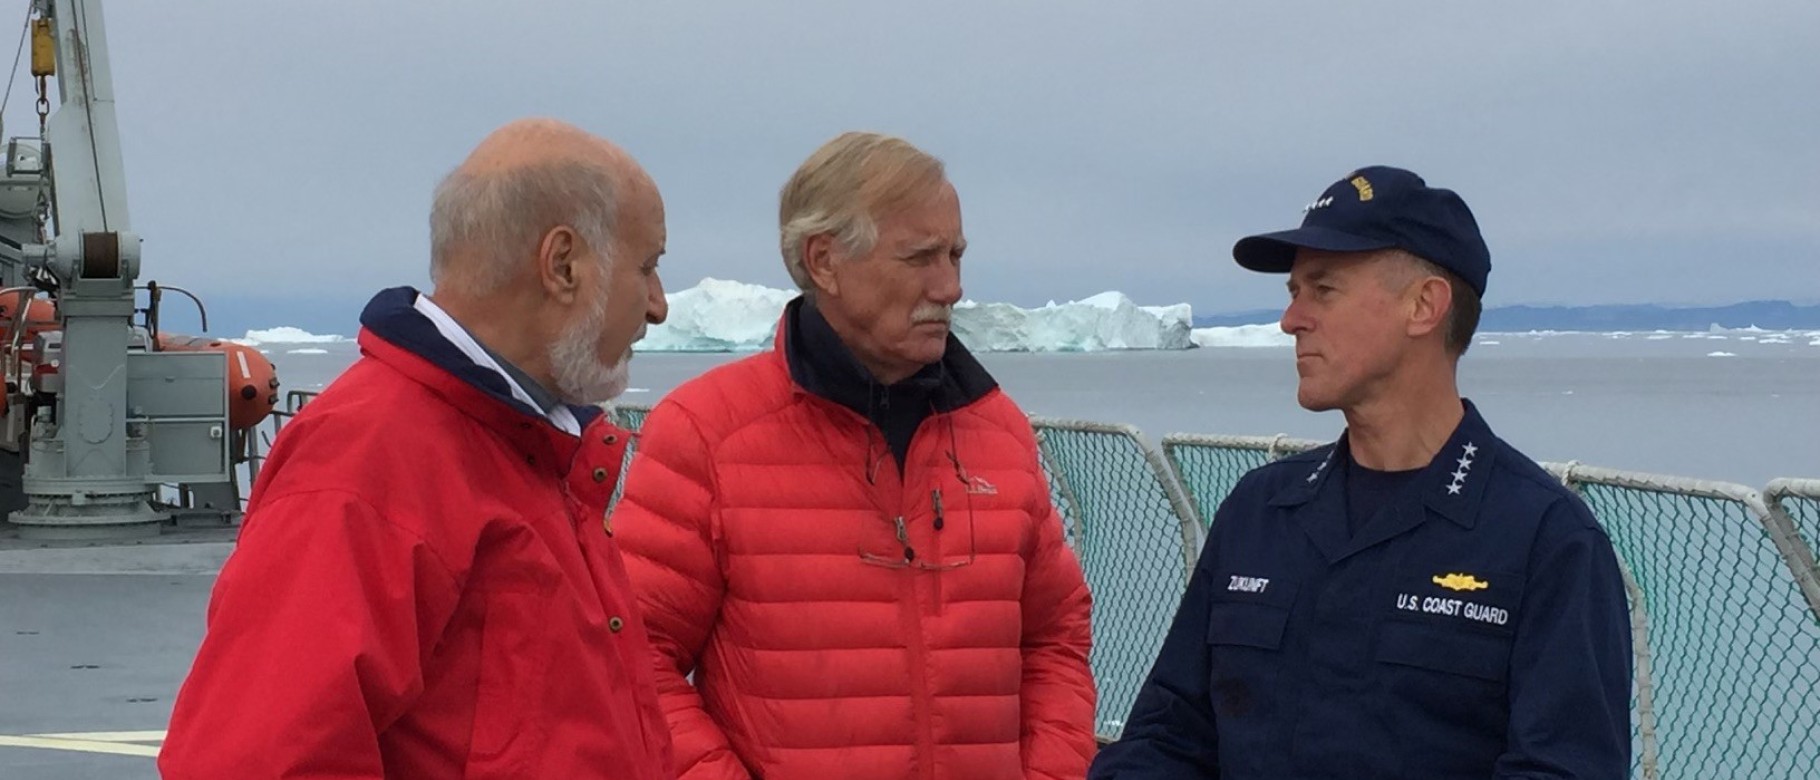 Sen. Angus King of Maine stands with a member of the U.S. Coast Guard on a Coast Guard boat